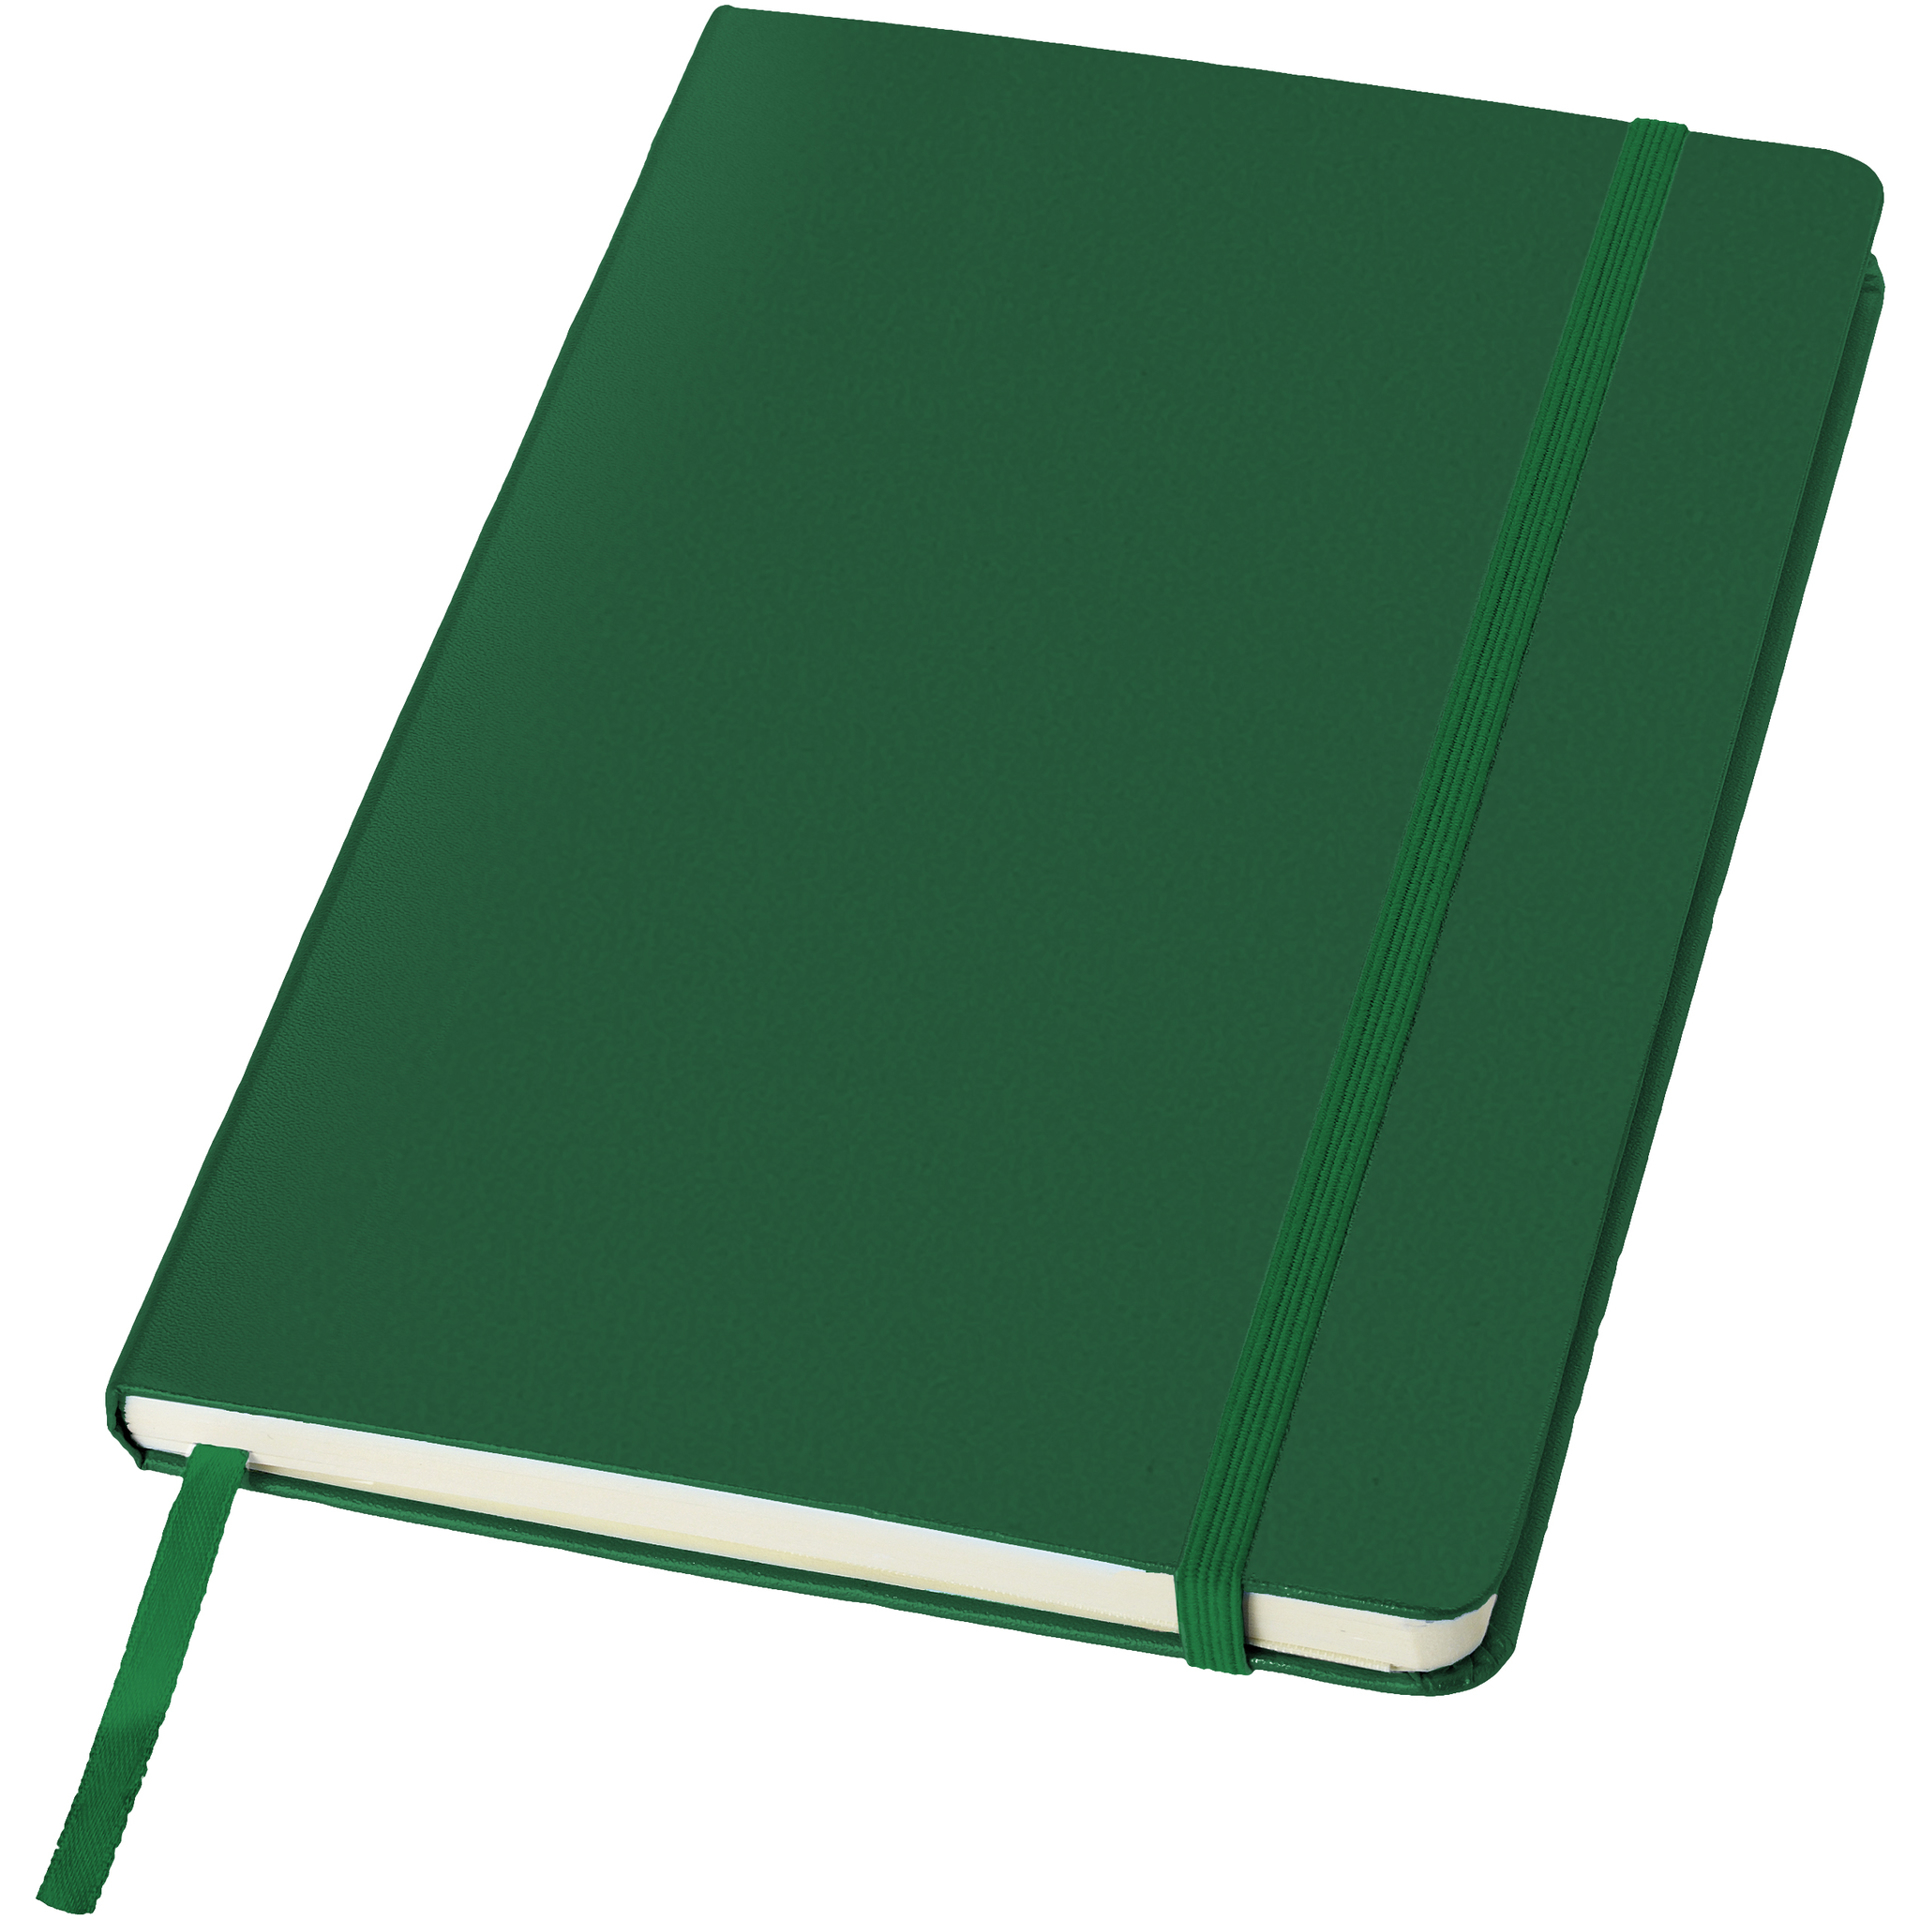 A5 hard cover notebook in green with green elastic closure and ribbon